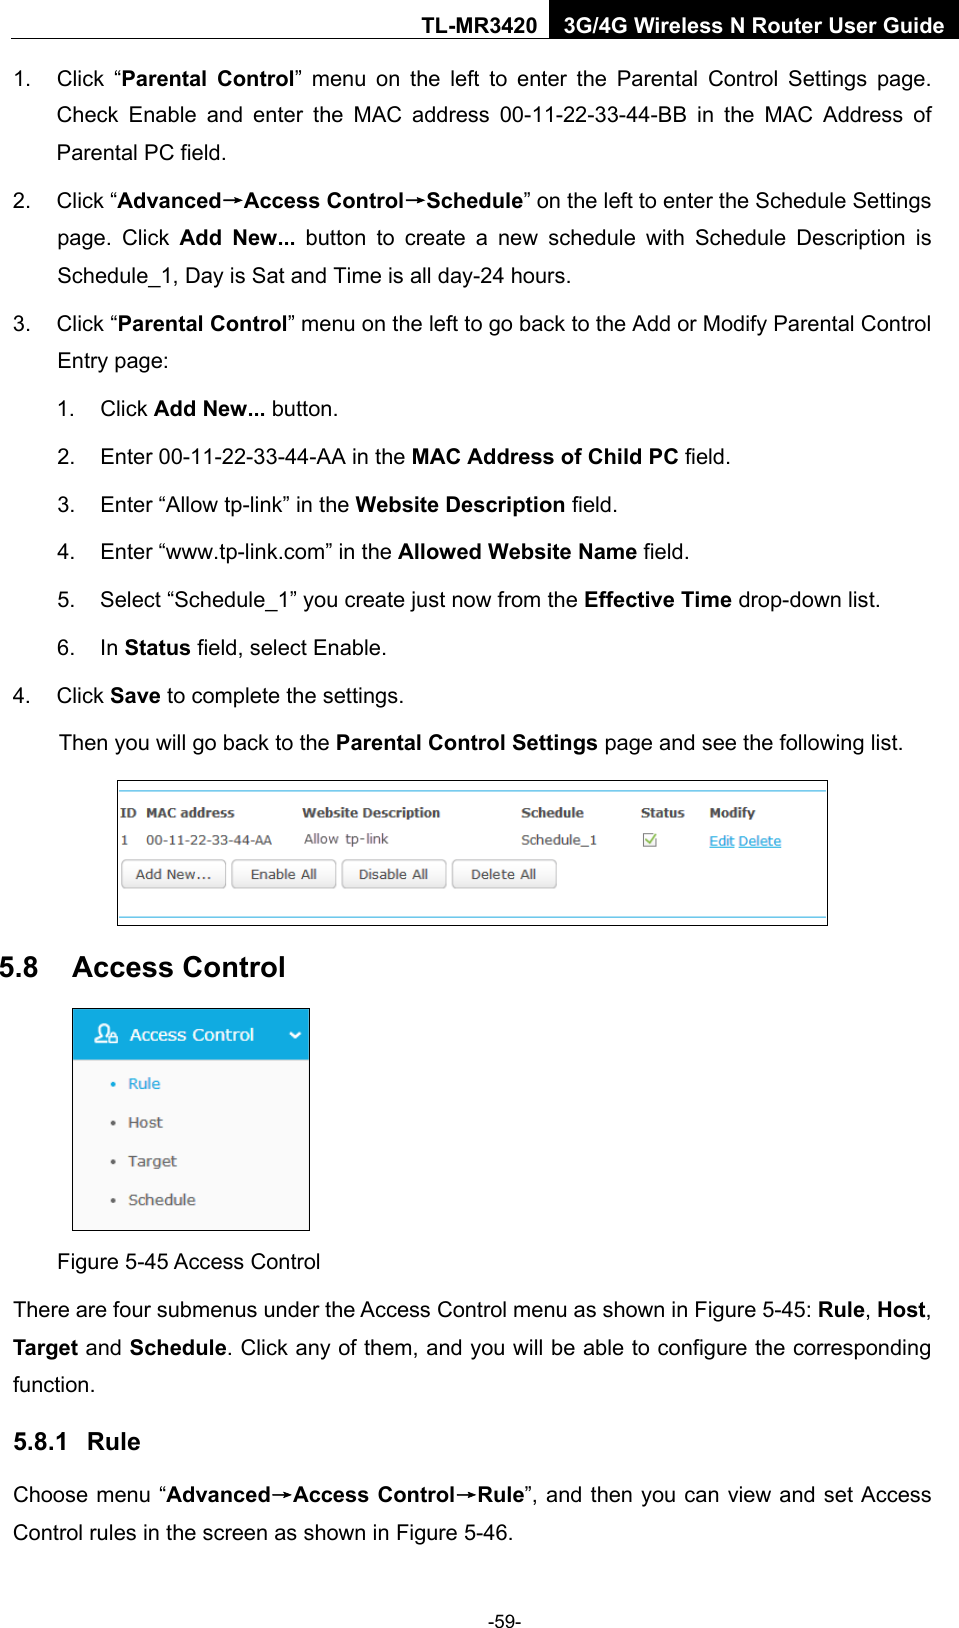    -59- TL-MR3420 3G/4G Wireless N Router User Guide 1. Click “Parental Control”  menu on the left to enter the Parental Control Settings page. Check Enable and enter the MAC address 00-11-22-33-44-BB in the MAC Address of Parental PC field.   2. Click “Advanced→Access Control→Schedule” on the left to enter the Schedule Settings page. Click Add New... button to create a new schedule with Schedule Description is Schedule_1, Day is Sat and Time is all day-24 hours.   3. Click “Parental Control” menu on the left to go back to the Add or Modify Parental Control Entry page:   1. Click Add New... button.   2. Enter 00-11-22-33-44-AA in the MAC Address of Child PC field.   3. Enter “Allow tp-link” in the Website Description field.   4. Enter “www.tp-link.com” in the Allowed Website Name field.   5. Select “Schedule_1” you create just now from the Effective Time drop-down list.   6. In Status field, select Enable.   4. Click Save to complete the settings. Then you will go back to the Parental Control Settings page and see the following list.  5.8 Access Control  Figure 5-45 Access Control There are four submenus under the Access Control menu as shown in Figure 5-45: Rule, Host, Target and Schedule. Click any of them, and you will be able to configure the corresponding function. 5.8.1 Rule Choose menu “Advanced→Access Control→Rule”, and then you can view and set Access Control rules in the screen as shown in Figure 5-46.   